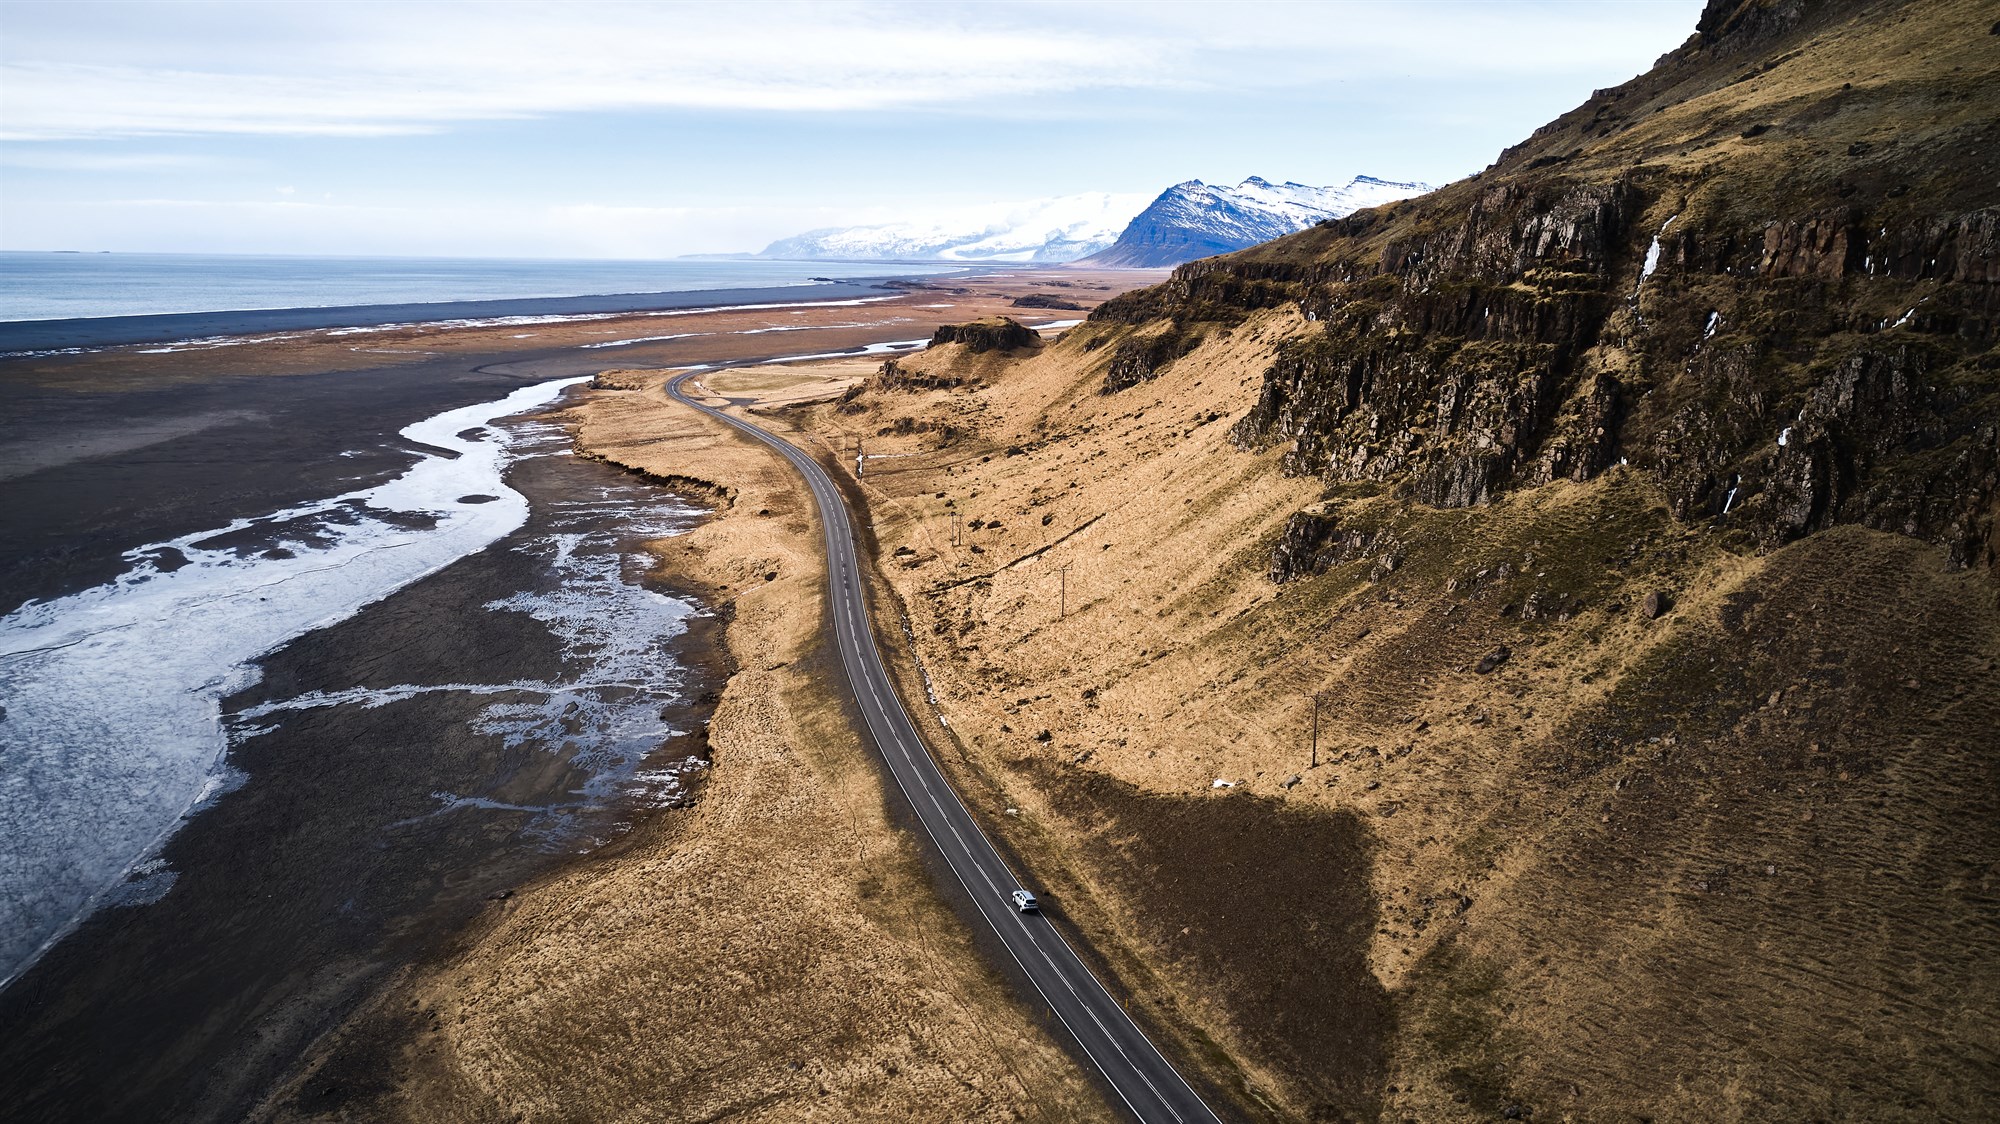 the remote landscape of Iceland